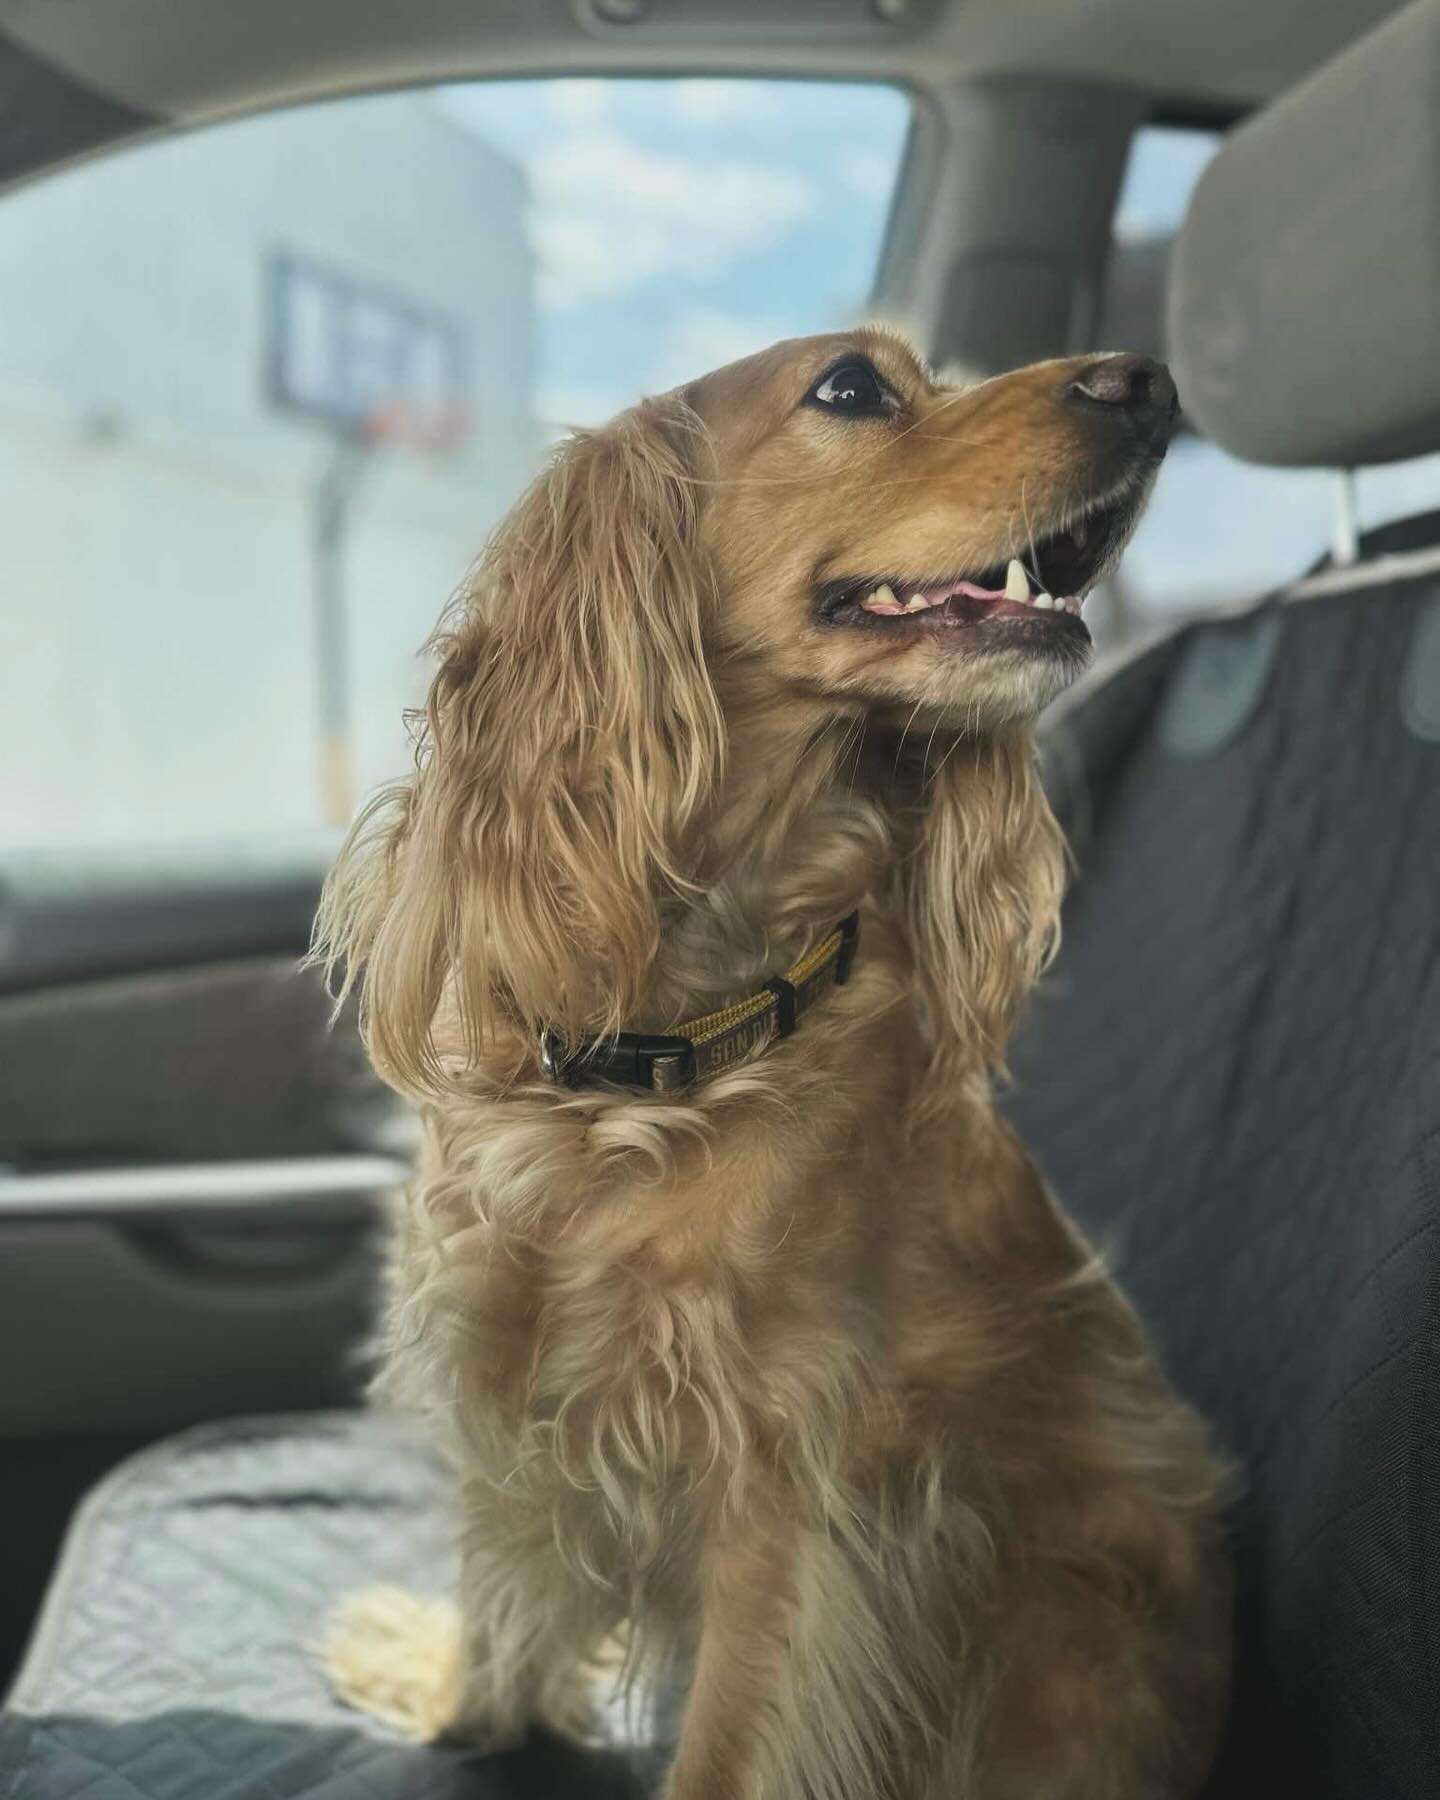 Some fur babies like riding in cars with friends, others prefer riding solo. That&rsquo;s why we offer private and group rides. 

Whether your four-legged bestie is anxious or a social butterfly, we try our best to accommodate for their comfort. Clic